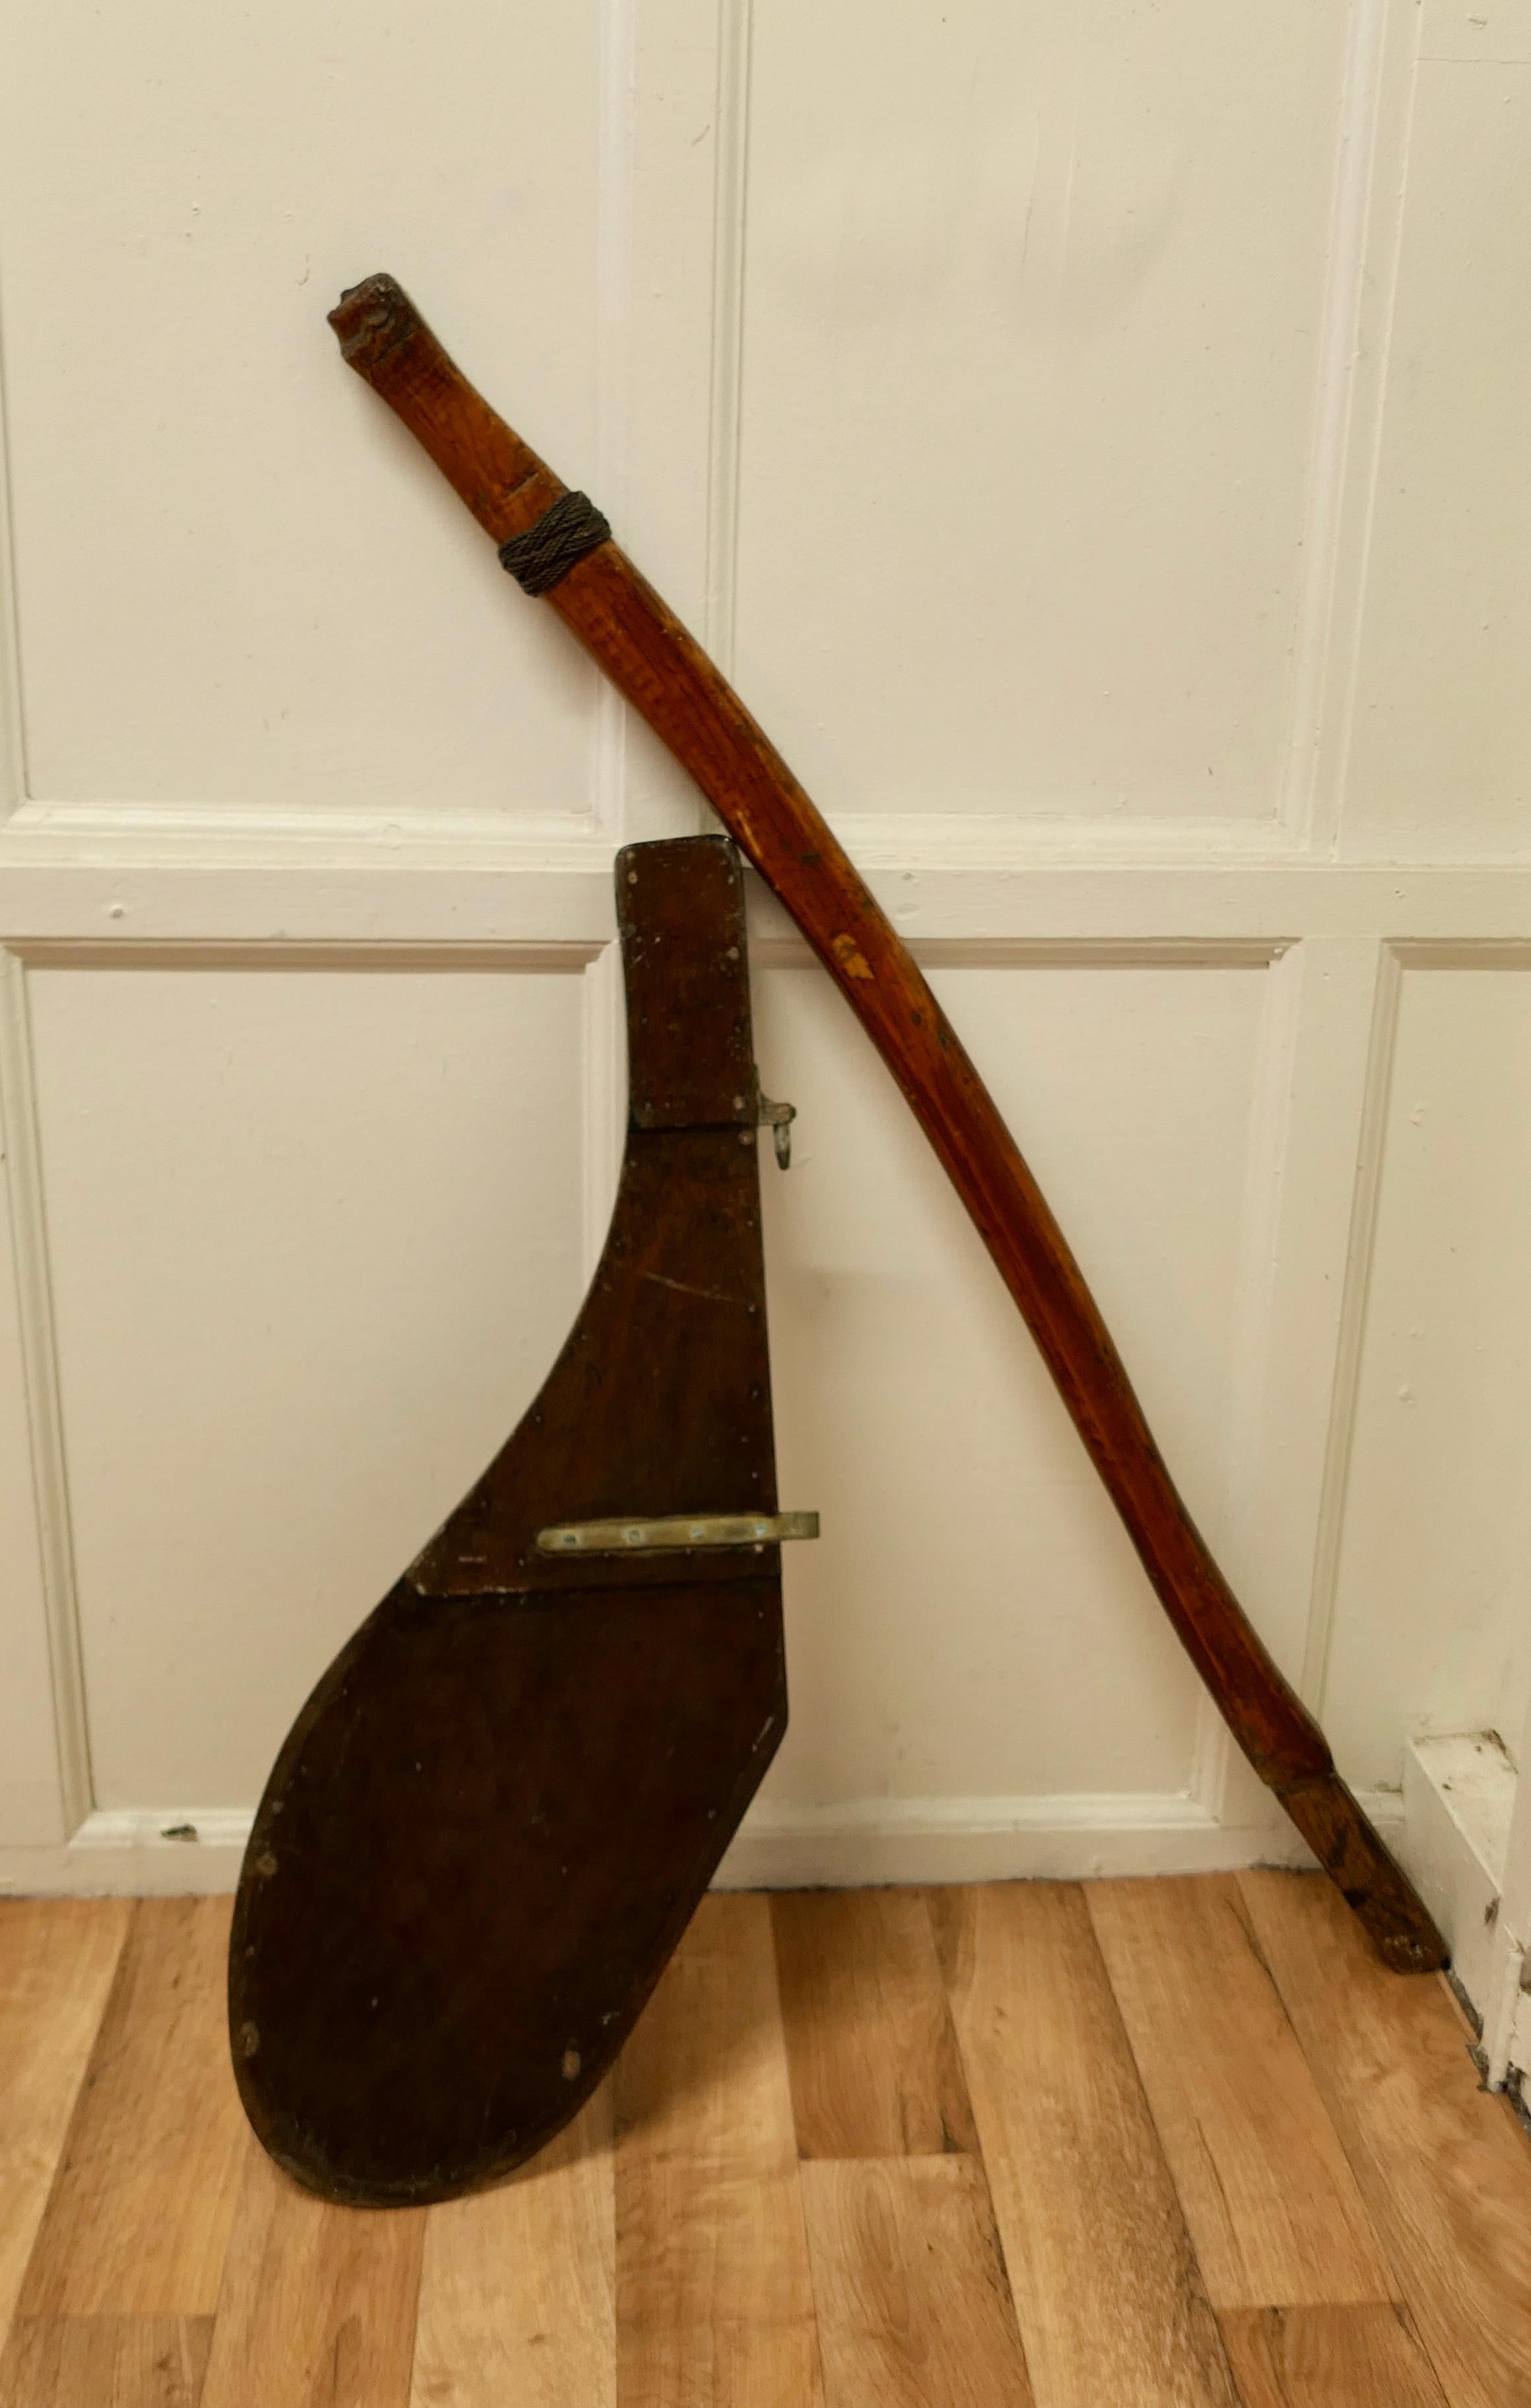 19th Century Yacht Rudder and Carved Tiller

The rudder is a good decorative piece as is the tiller which has a figure head carved on the end with a decorative rope binding
The Tiller is made in 3” Ash, it is 50” long
WD92.